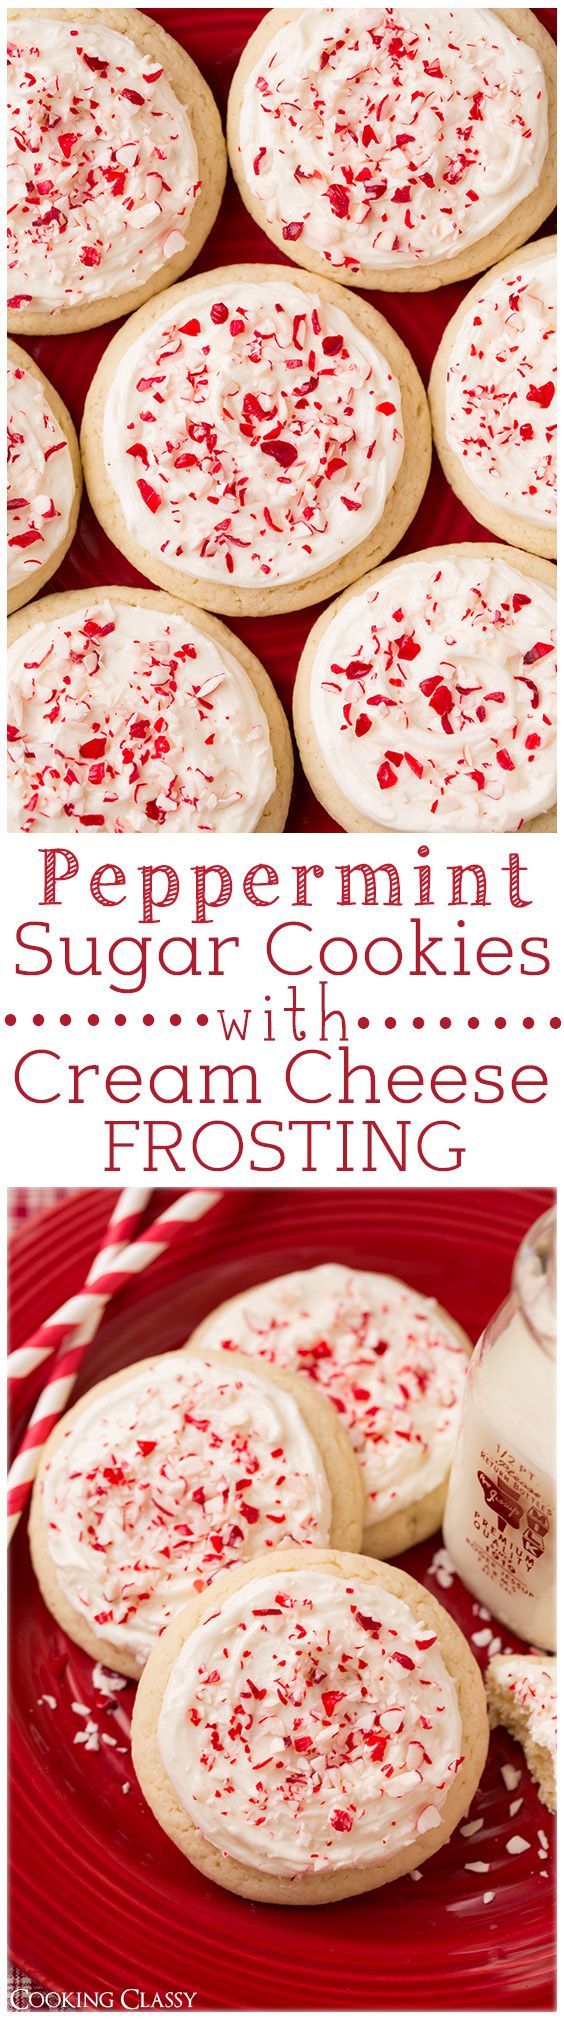 Peppermint Sugar Cookies with Cream Cheese Frosting- these cookies are SO DELICIOUS!! Lofthouse style melt-in-your-mouth!